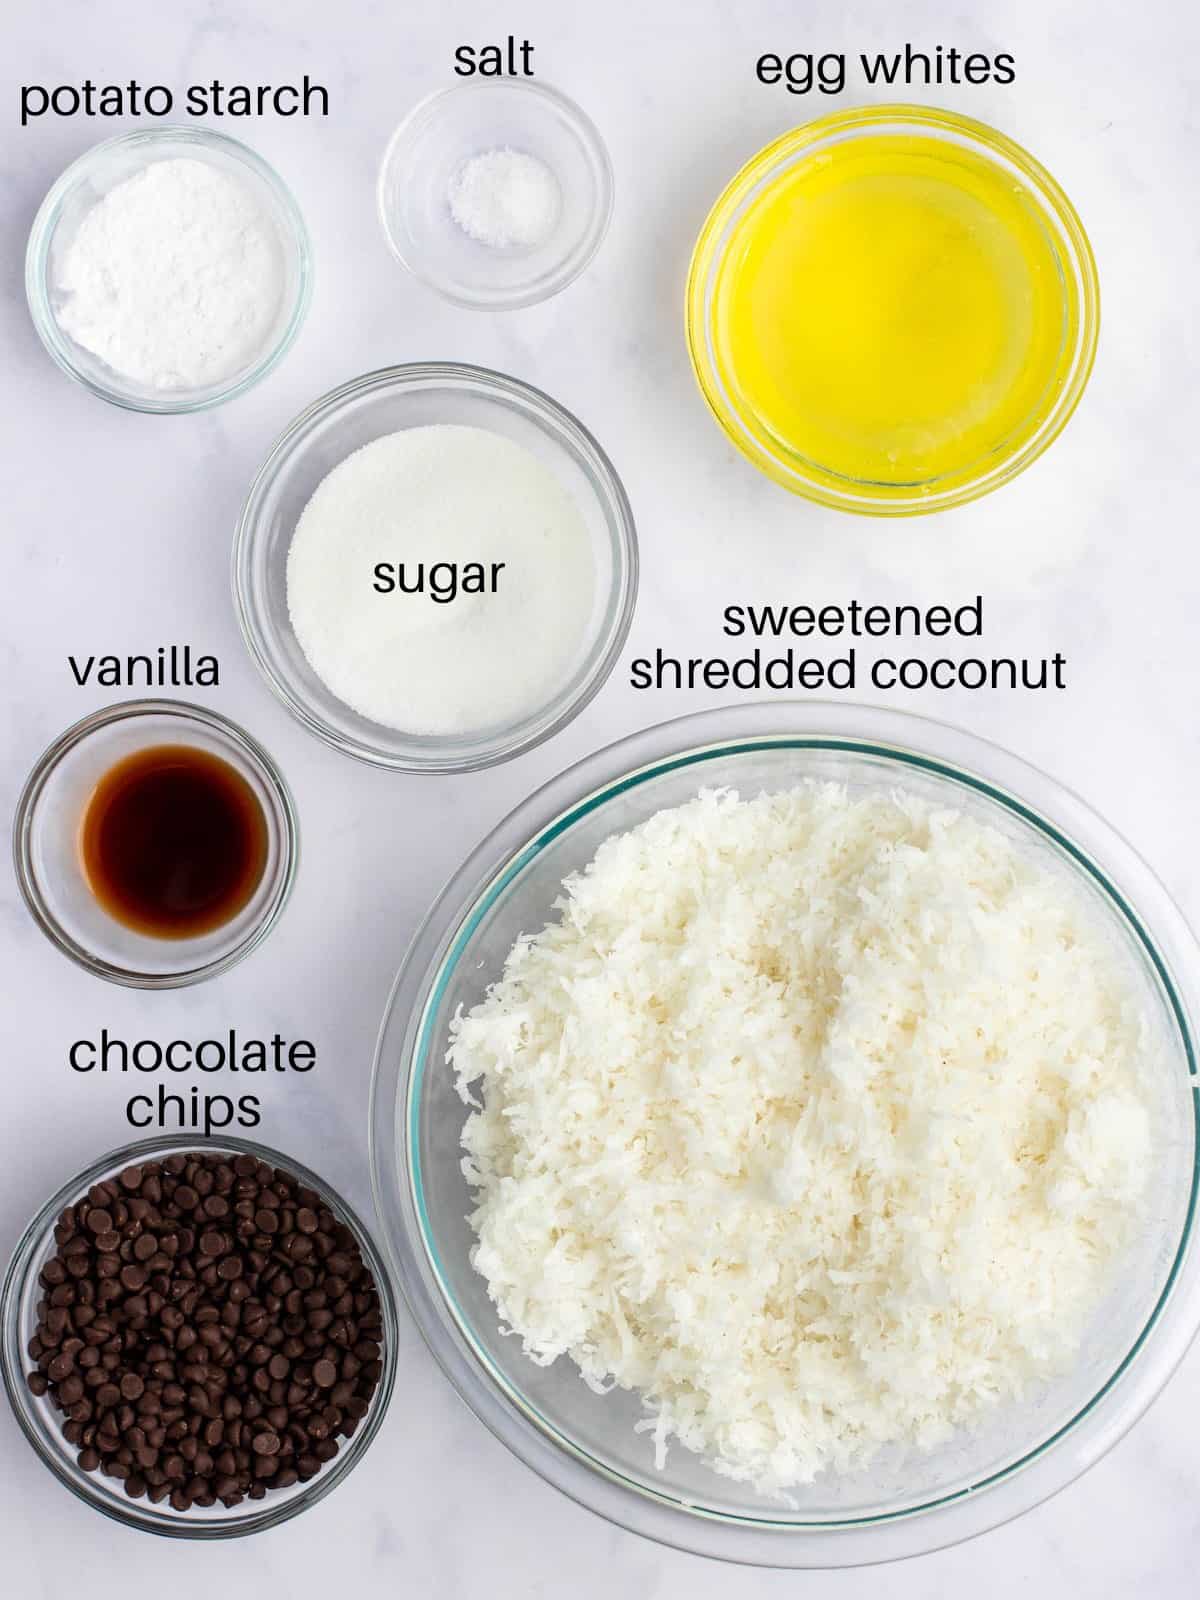 Ingredients for chocolate chip coconut macaroons in glass bowls.